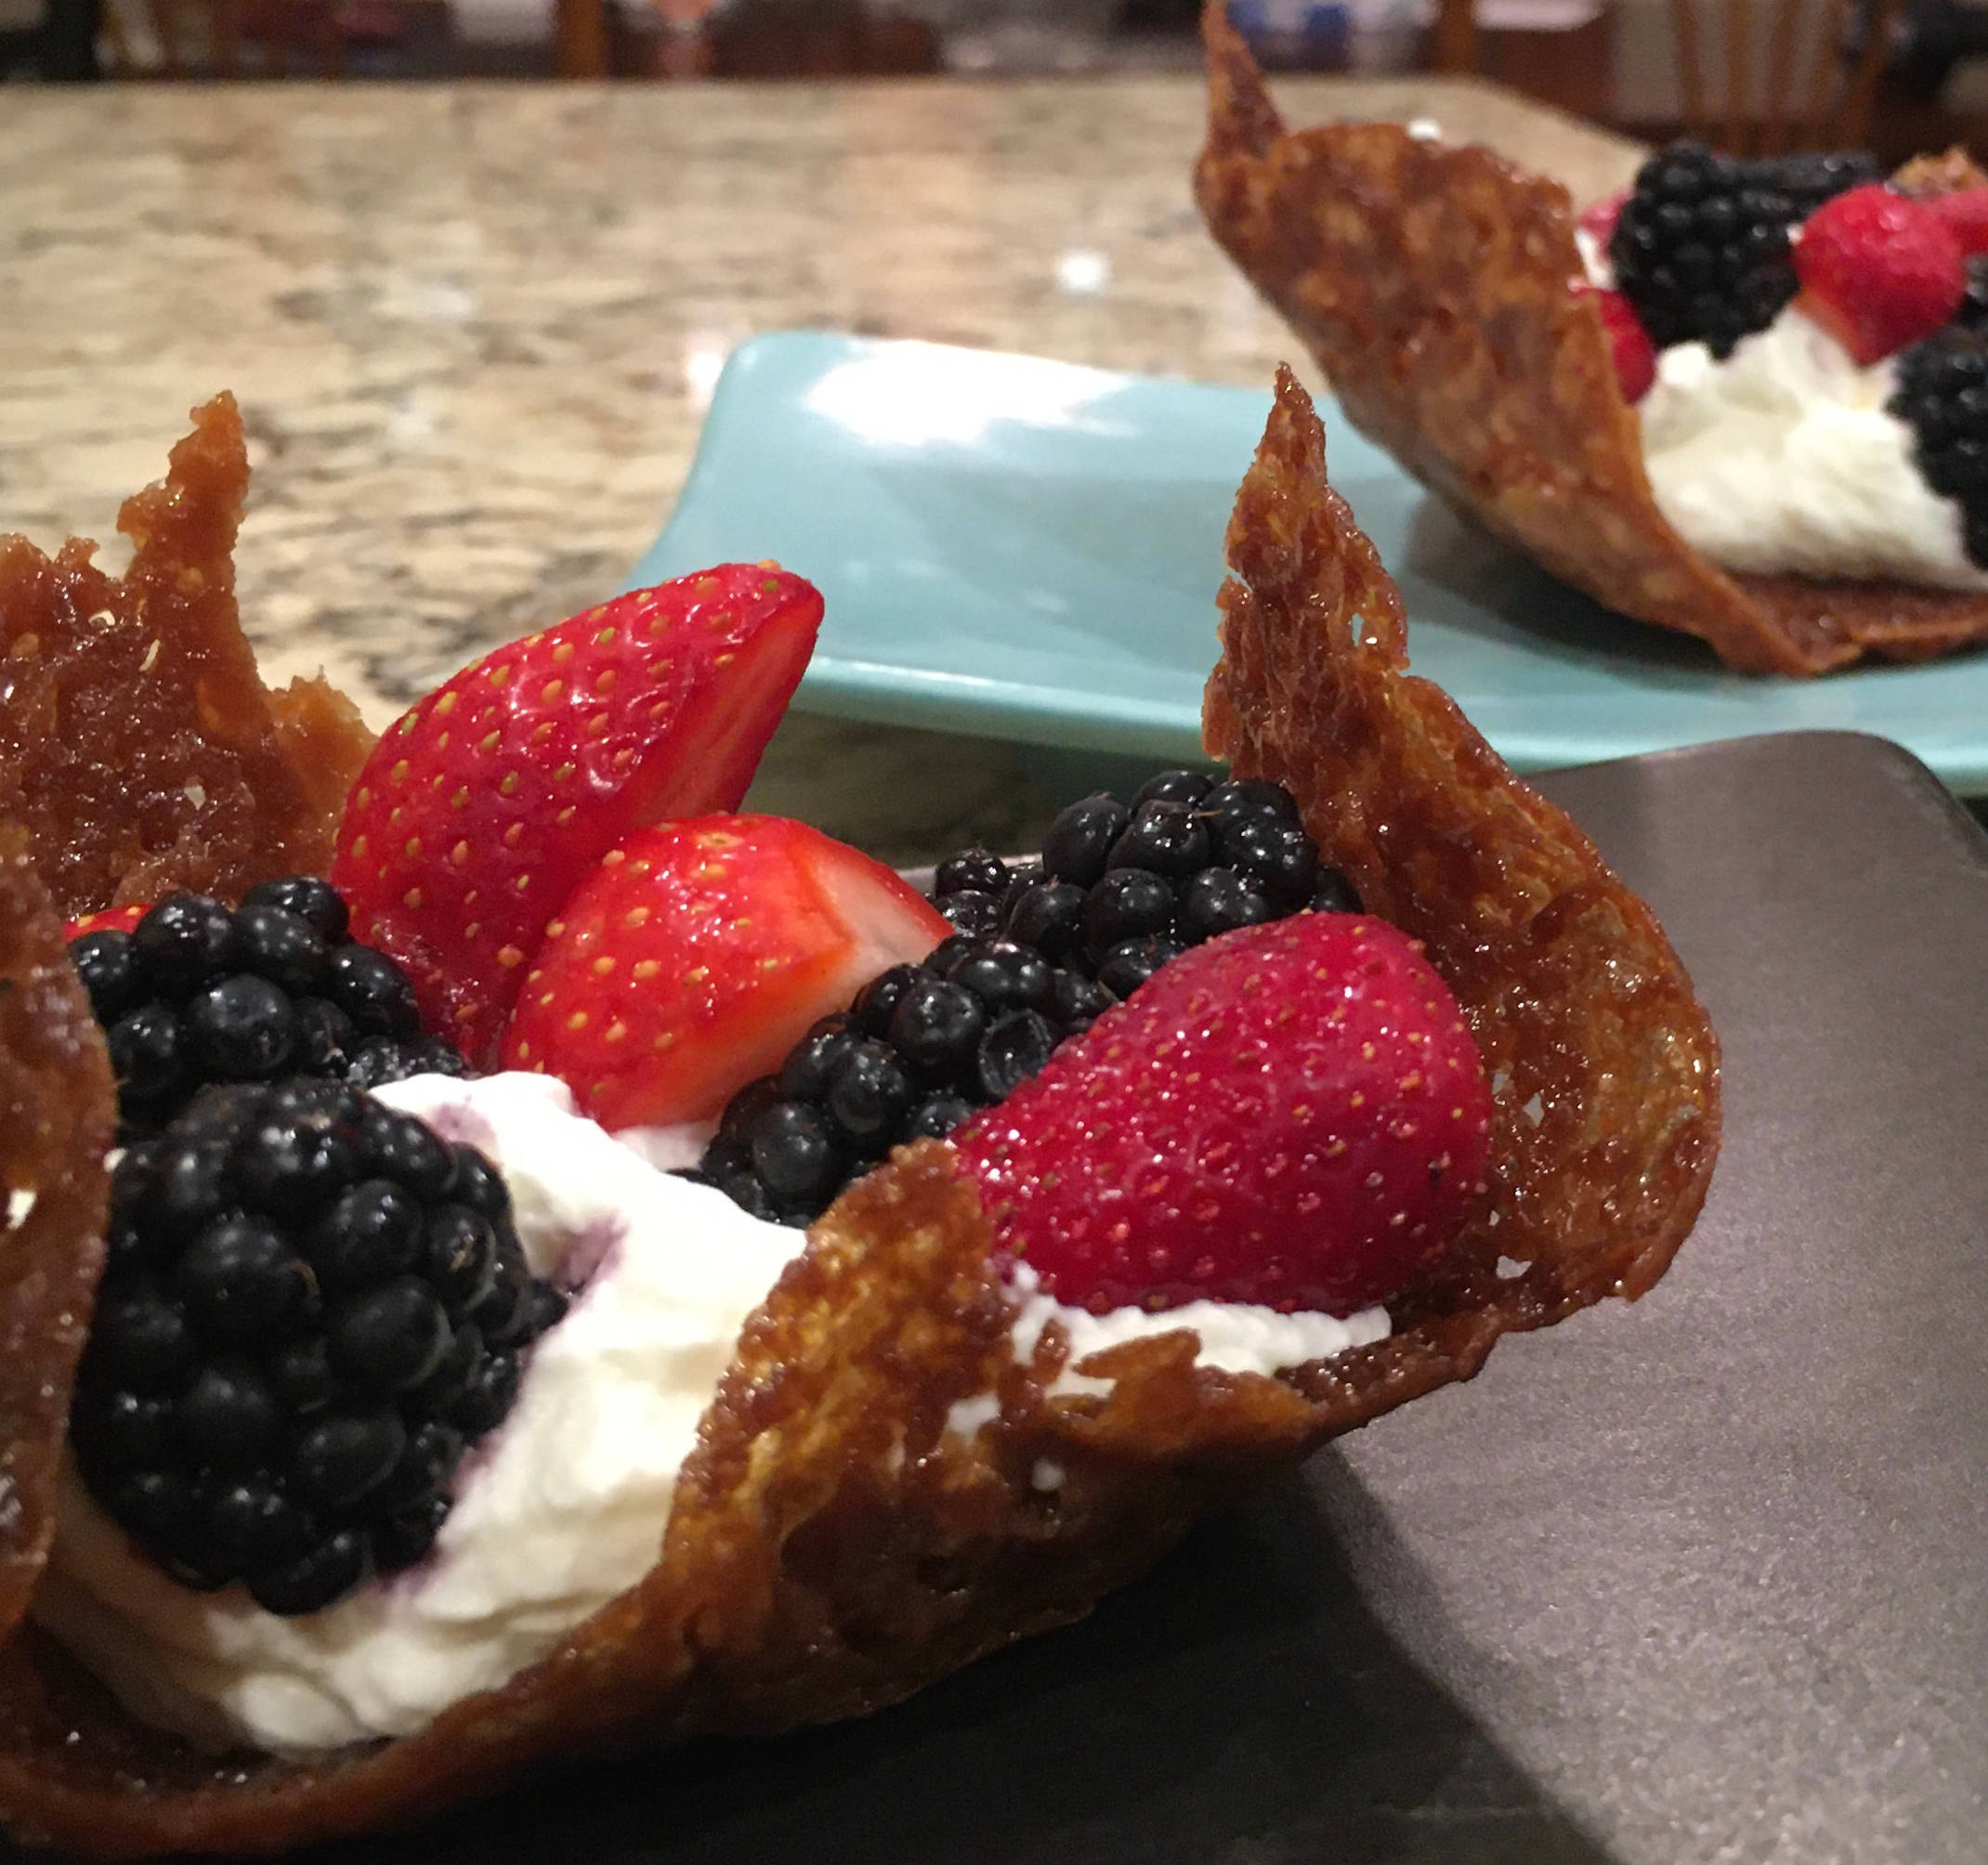 The finished brandy snaps, served with cream and fruit